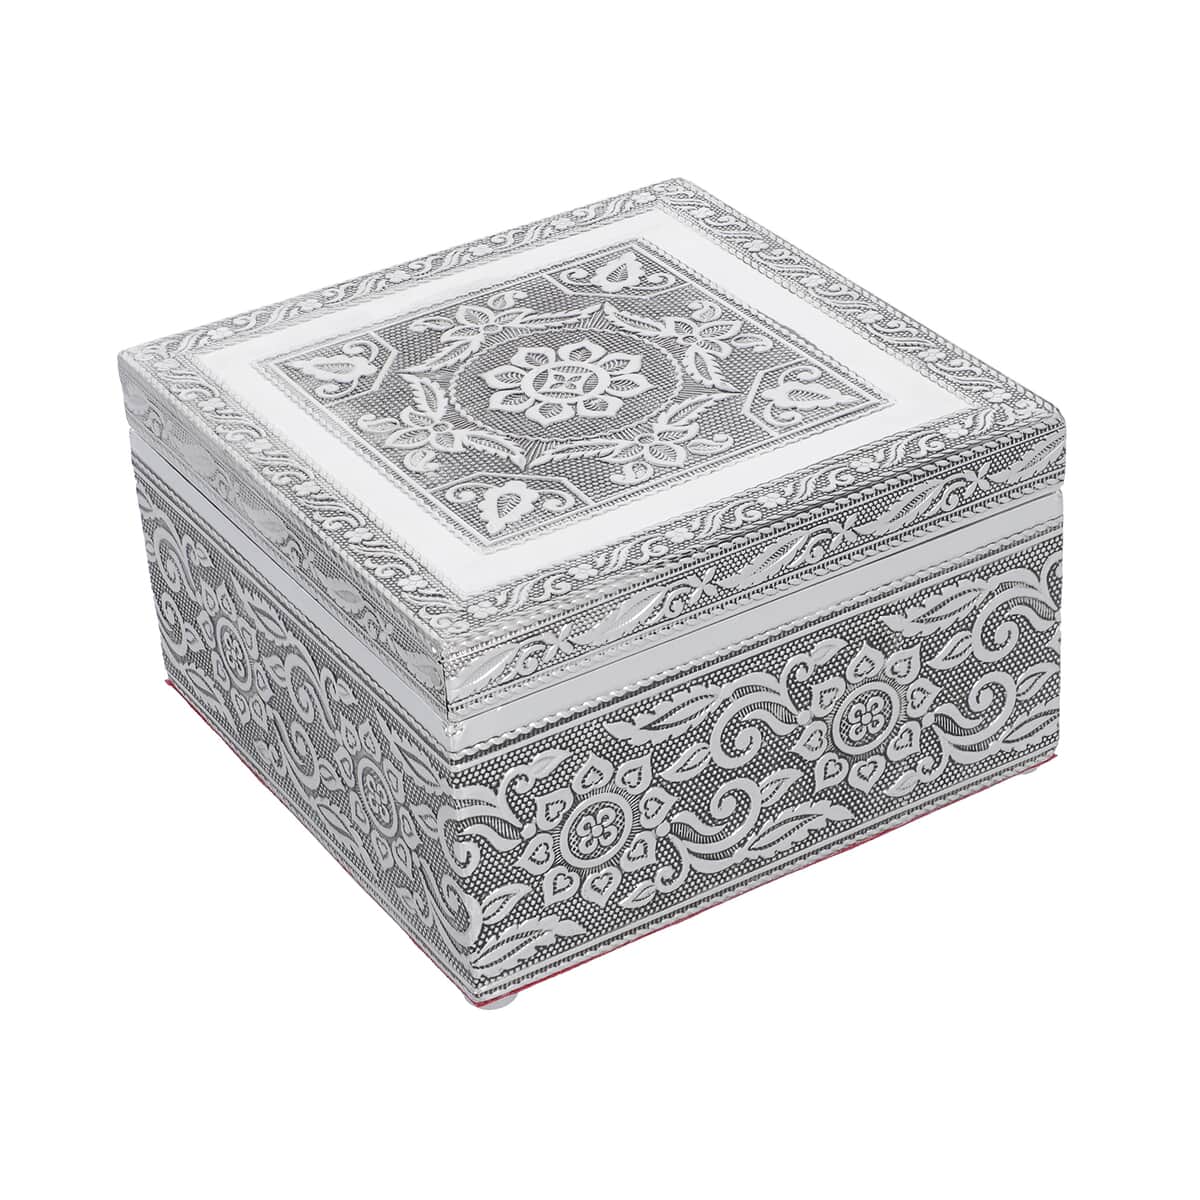 Set of 3 Handcrafted Mandala Embossed Aluminum Oxidized Multi-Purpose Nested Box with Scratch Protection Interior (4.75x4.75x2.5, 3.5x3.5x2.15, 2.5x2.5x1 in) image number 4